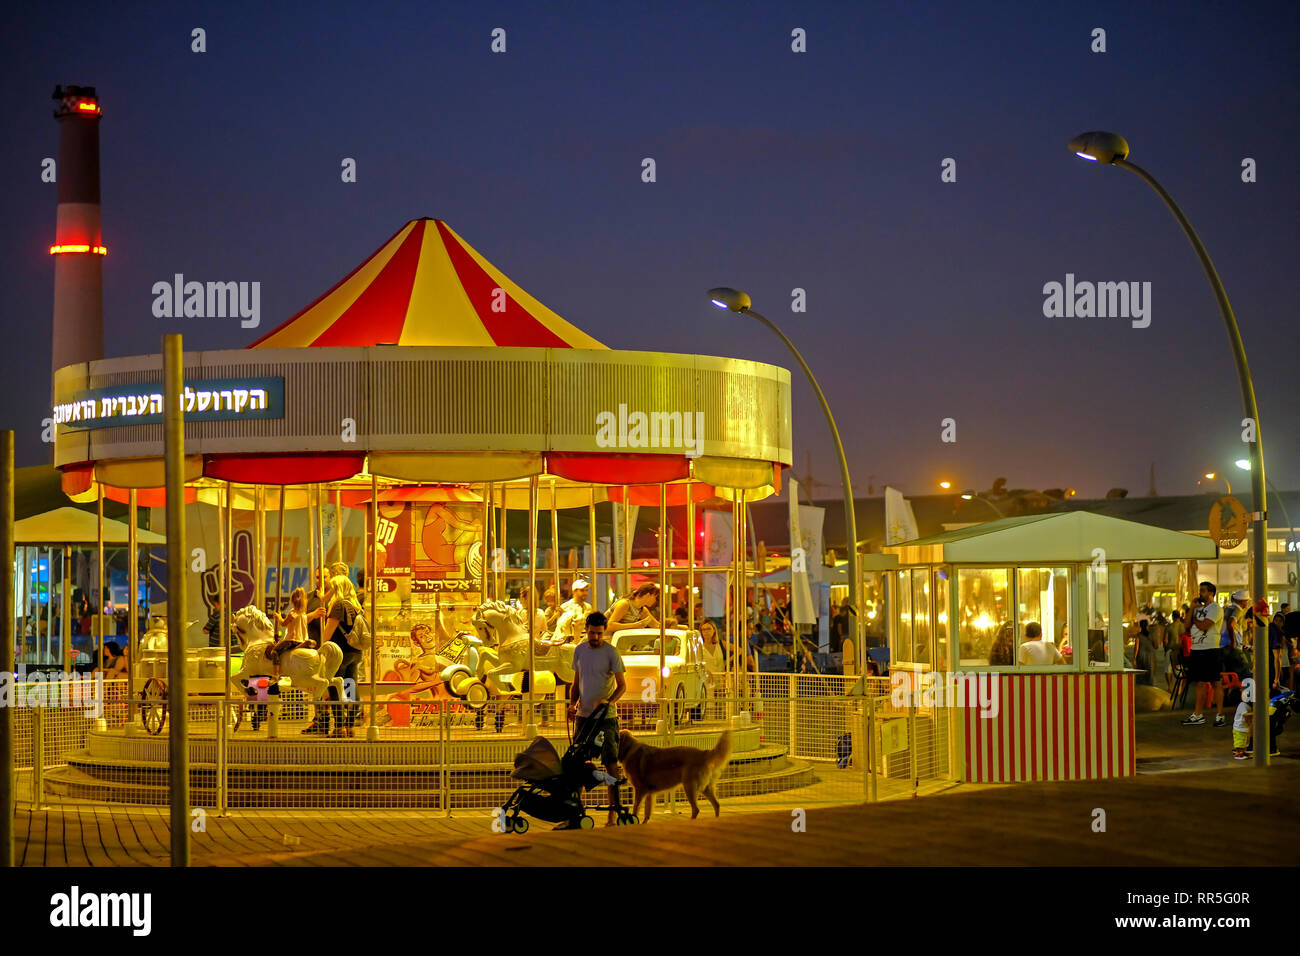 A carousel at night. Photographed at the old Tel Aviv Port, Israel Stock Photo